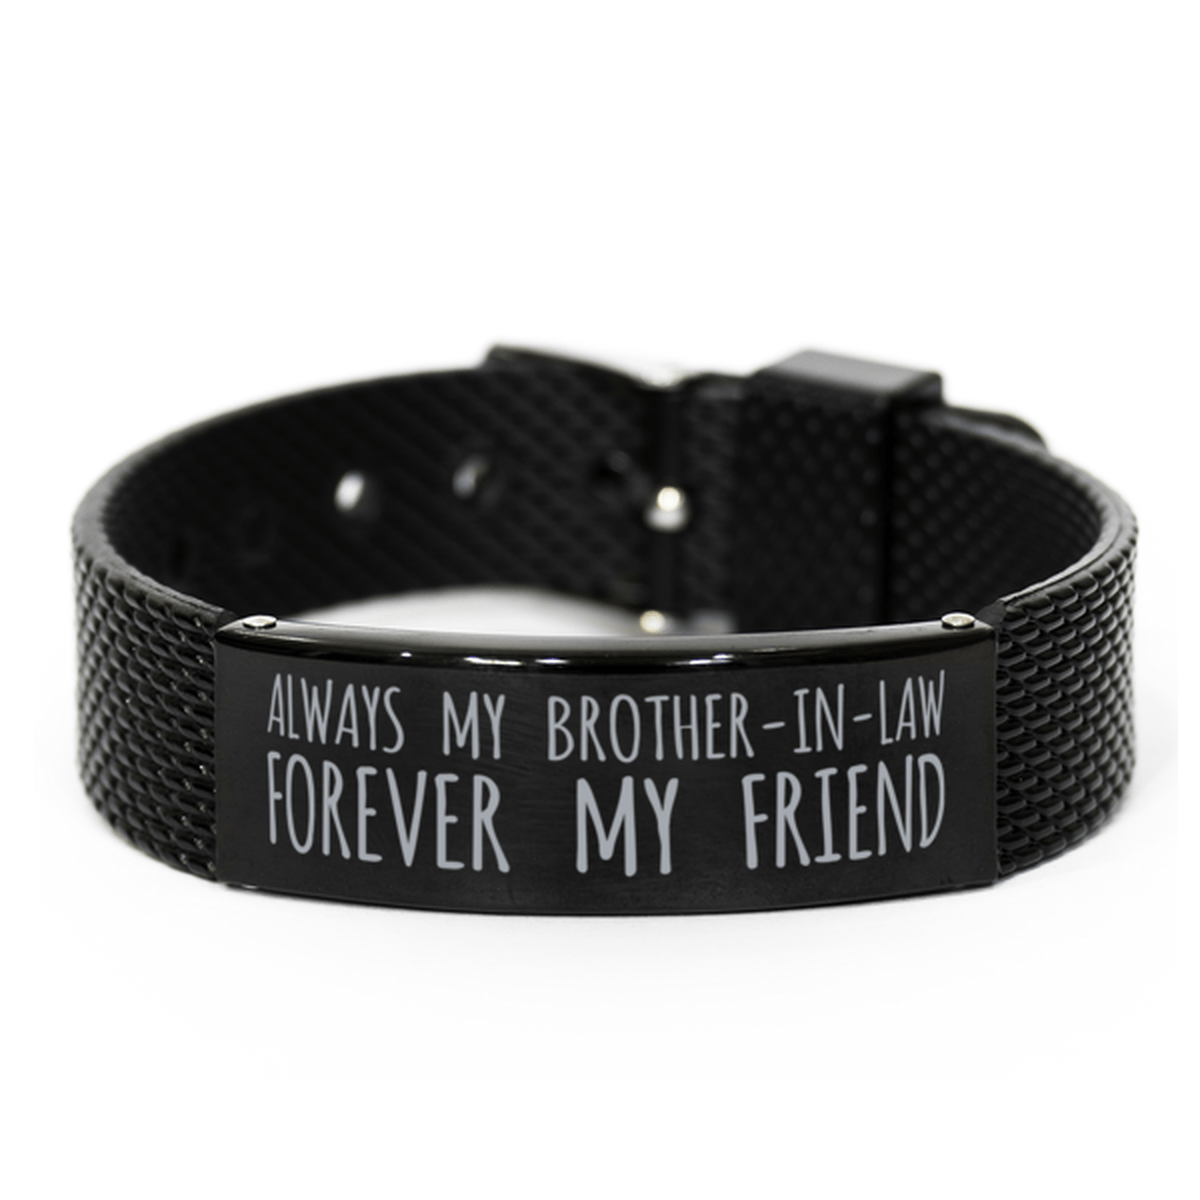 Inspirational Brother-In-Law Black Shark Mesh Bracelet, Always My Brother-In-Law Forever My Friend, Best Birthday Gifts for Family Friends